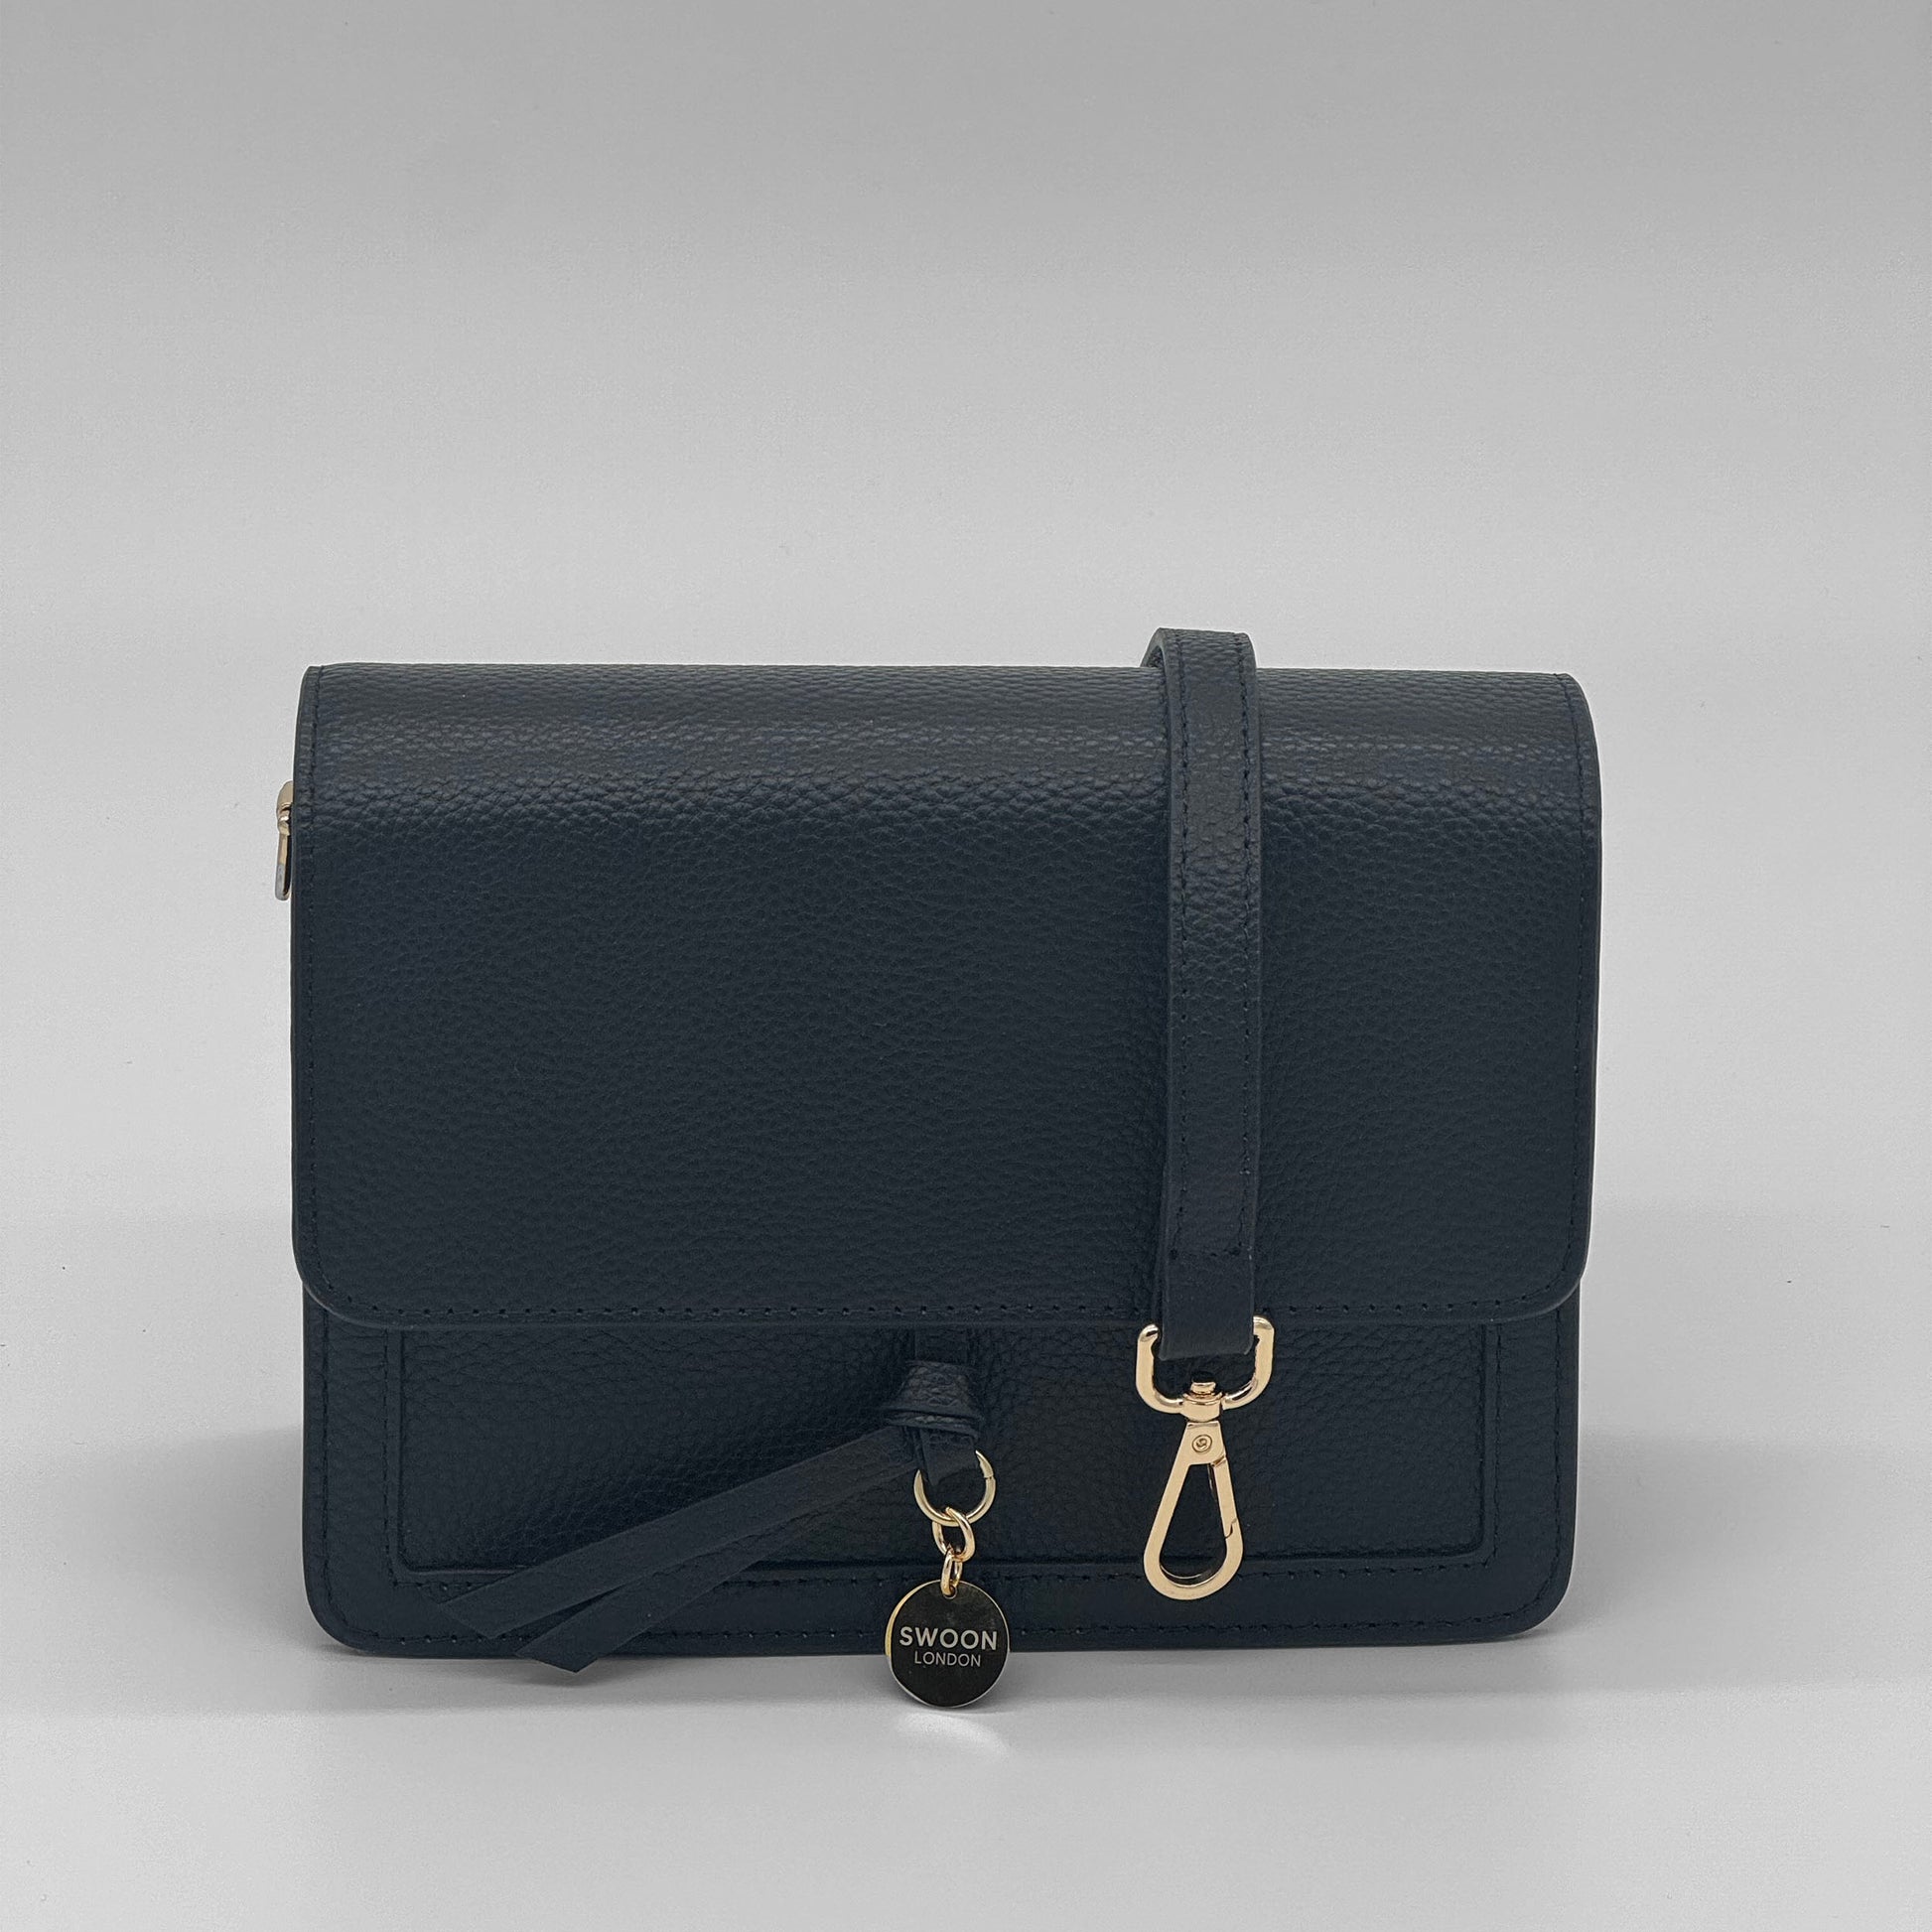 Harlan Leather Crossbody Bag in Midnight Black by Swoon London